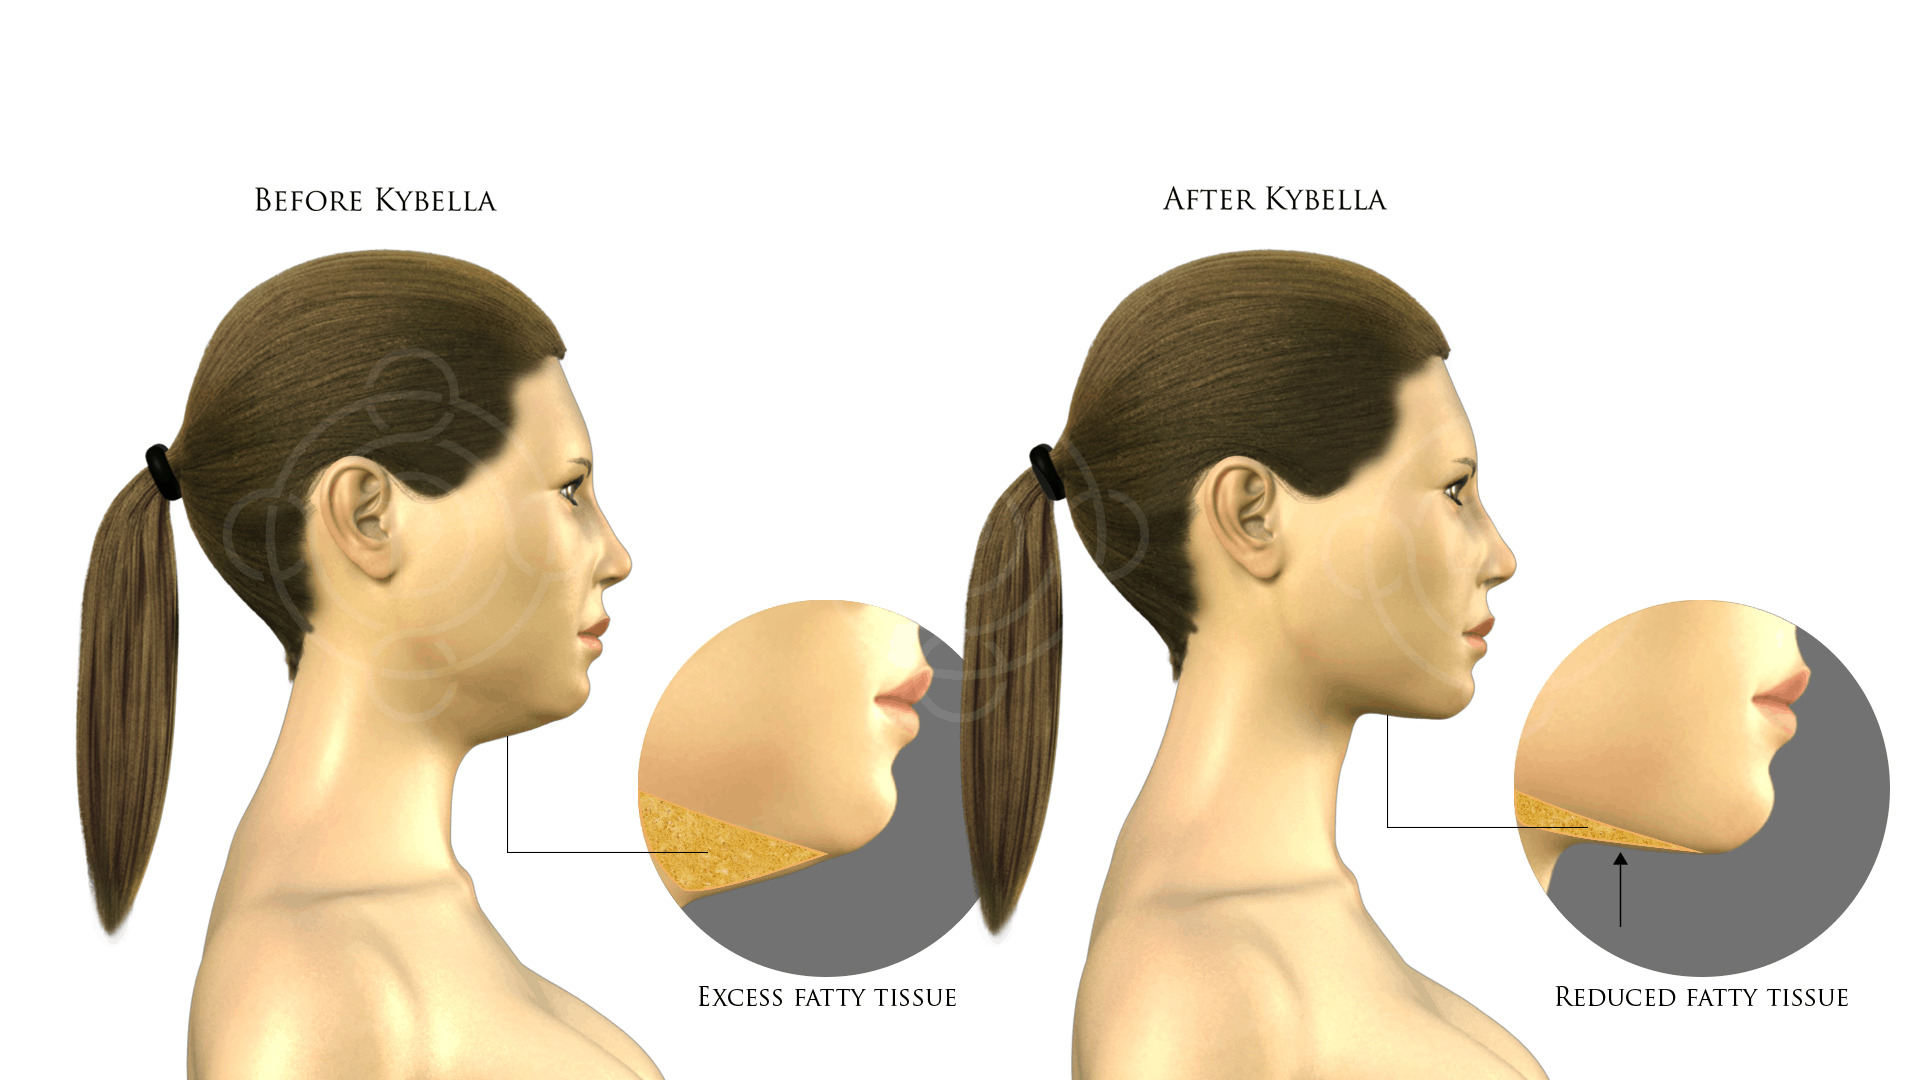 Chin before and after Kybella treatment